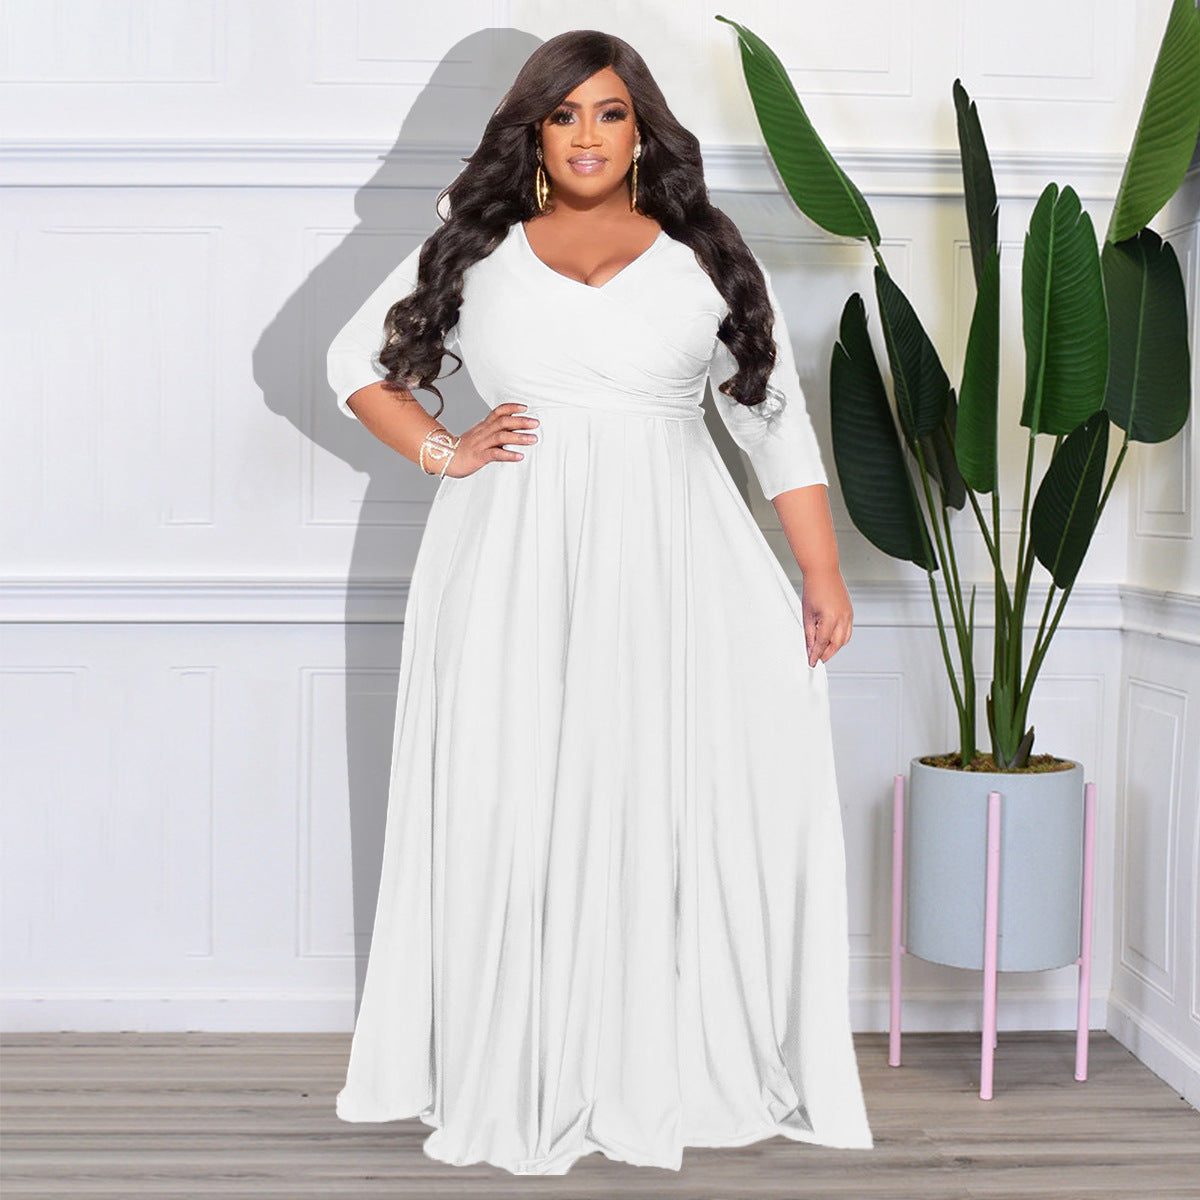 Plus Size Woman Women's Solid Color High Waist V-neck Sexy Wedding Long Dress